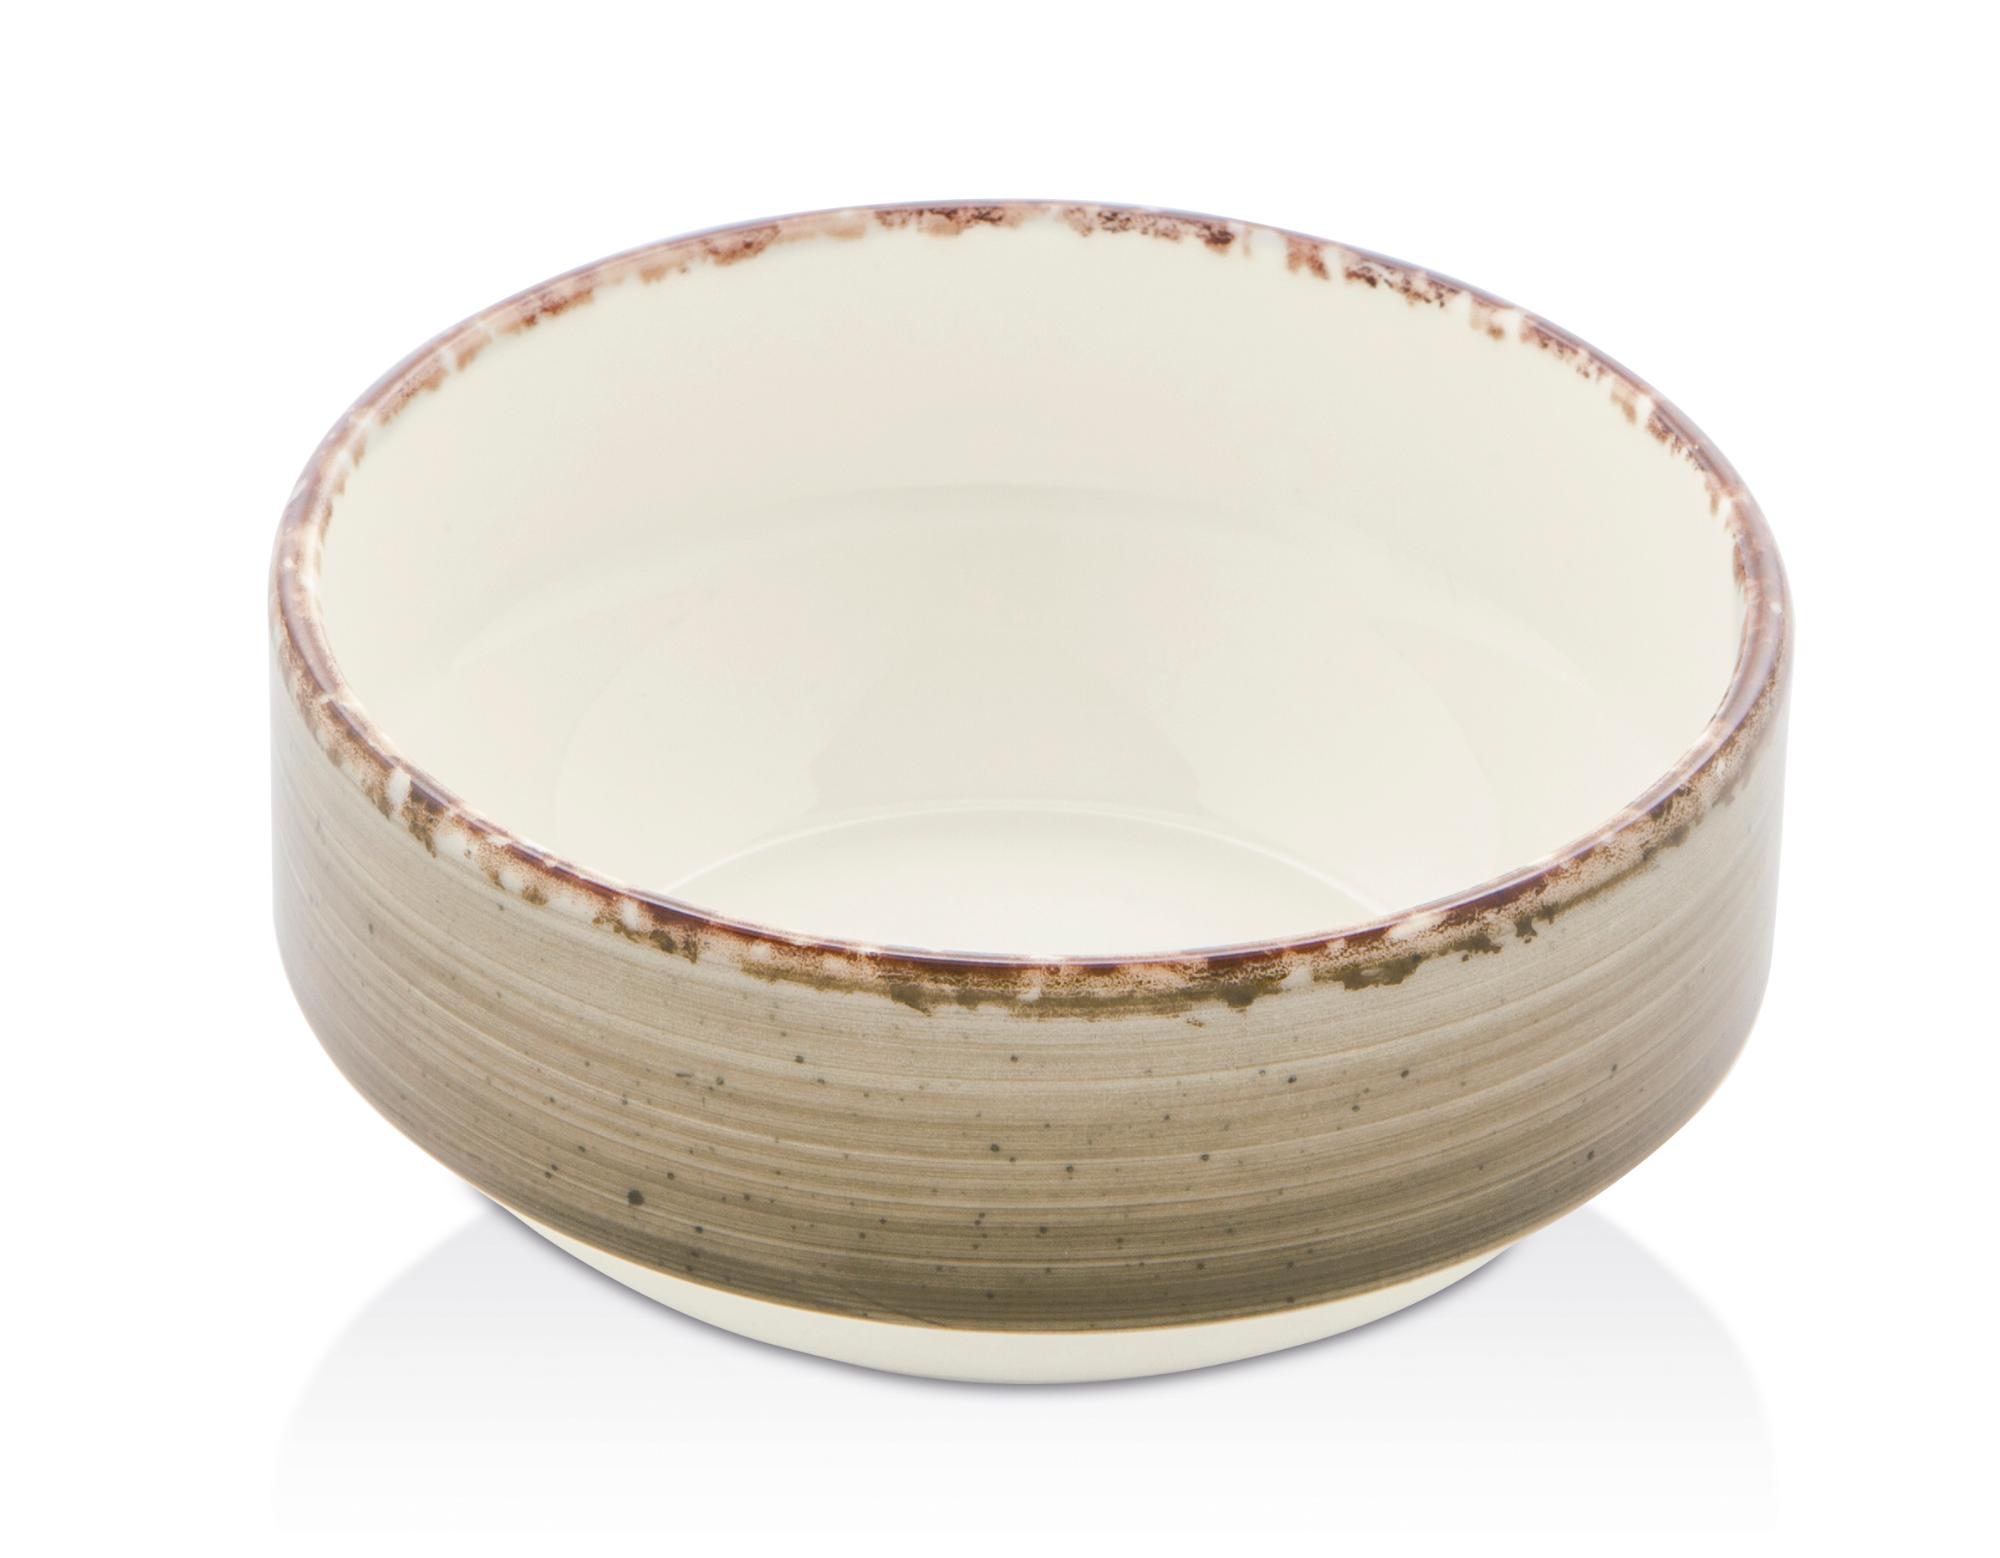 Agat stackable bowl, 120mm